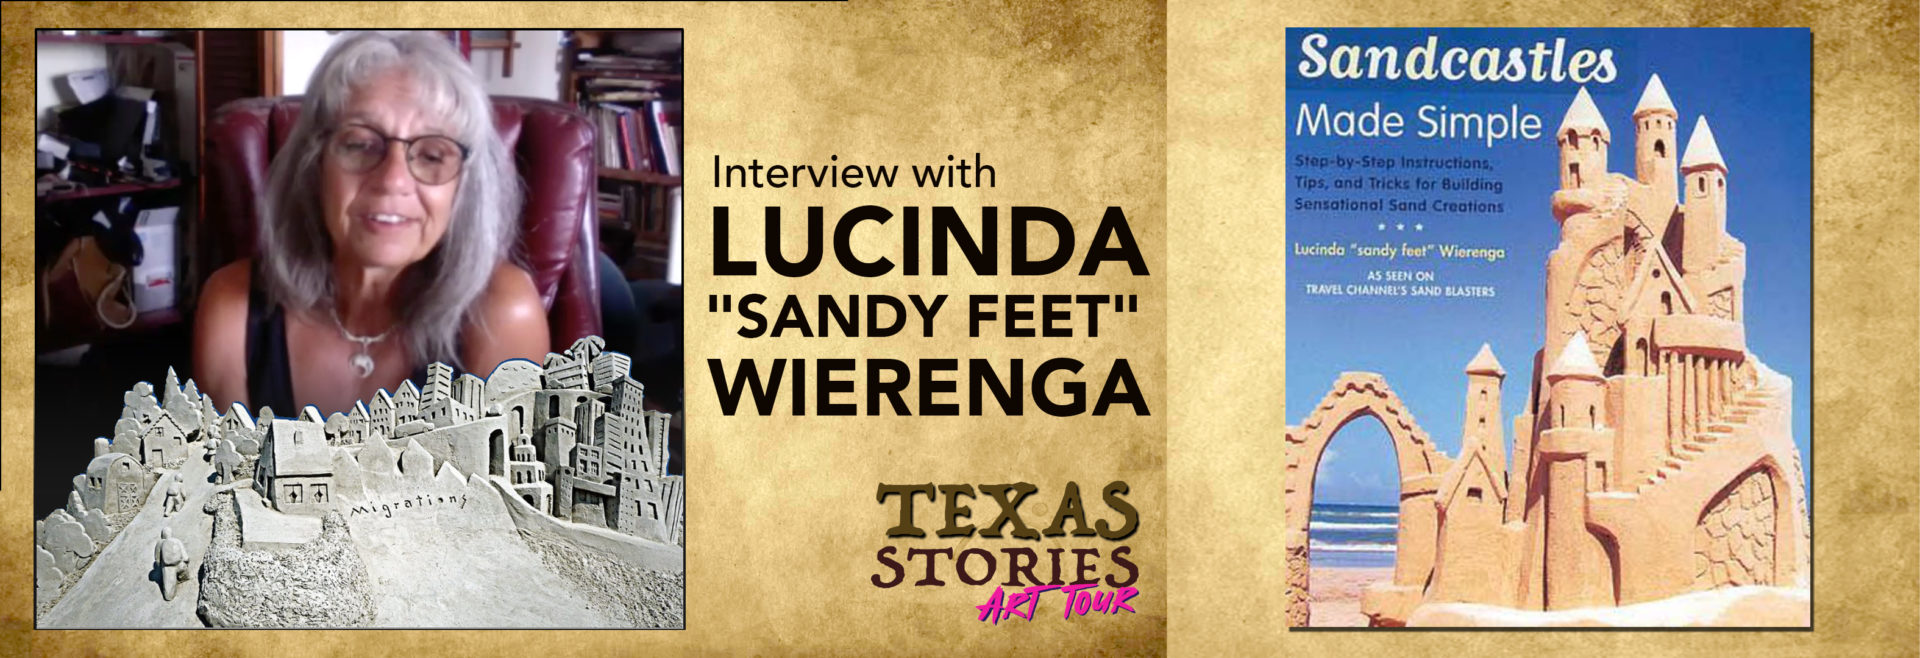  Artist Lucinda Sandy Feet Wierenga. Lucinda's 2005 book, Sandcastles Made Simple: Step-By-Step Instructions, Tips, and Tricks for Building Sensational Sand Creations.